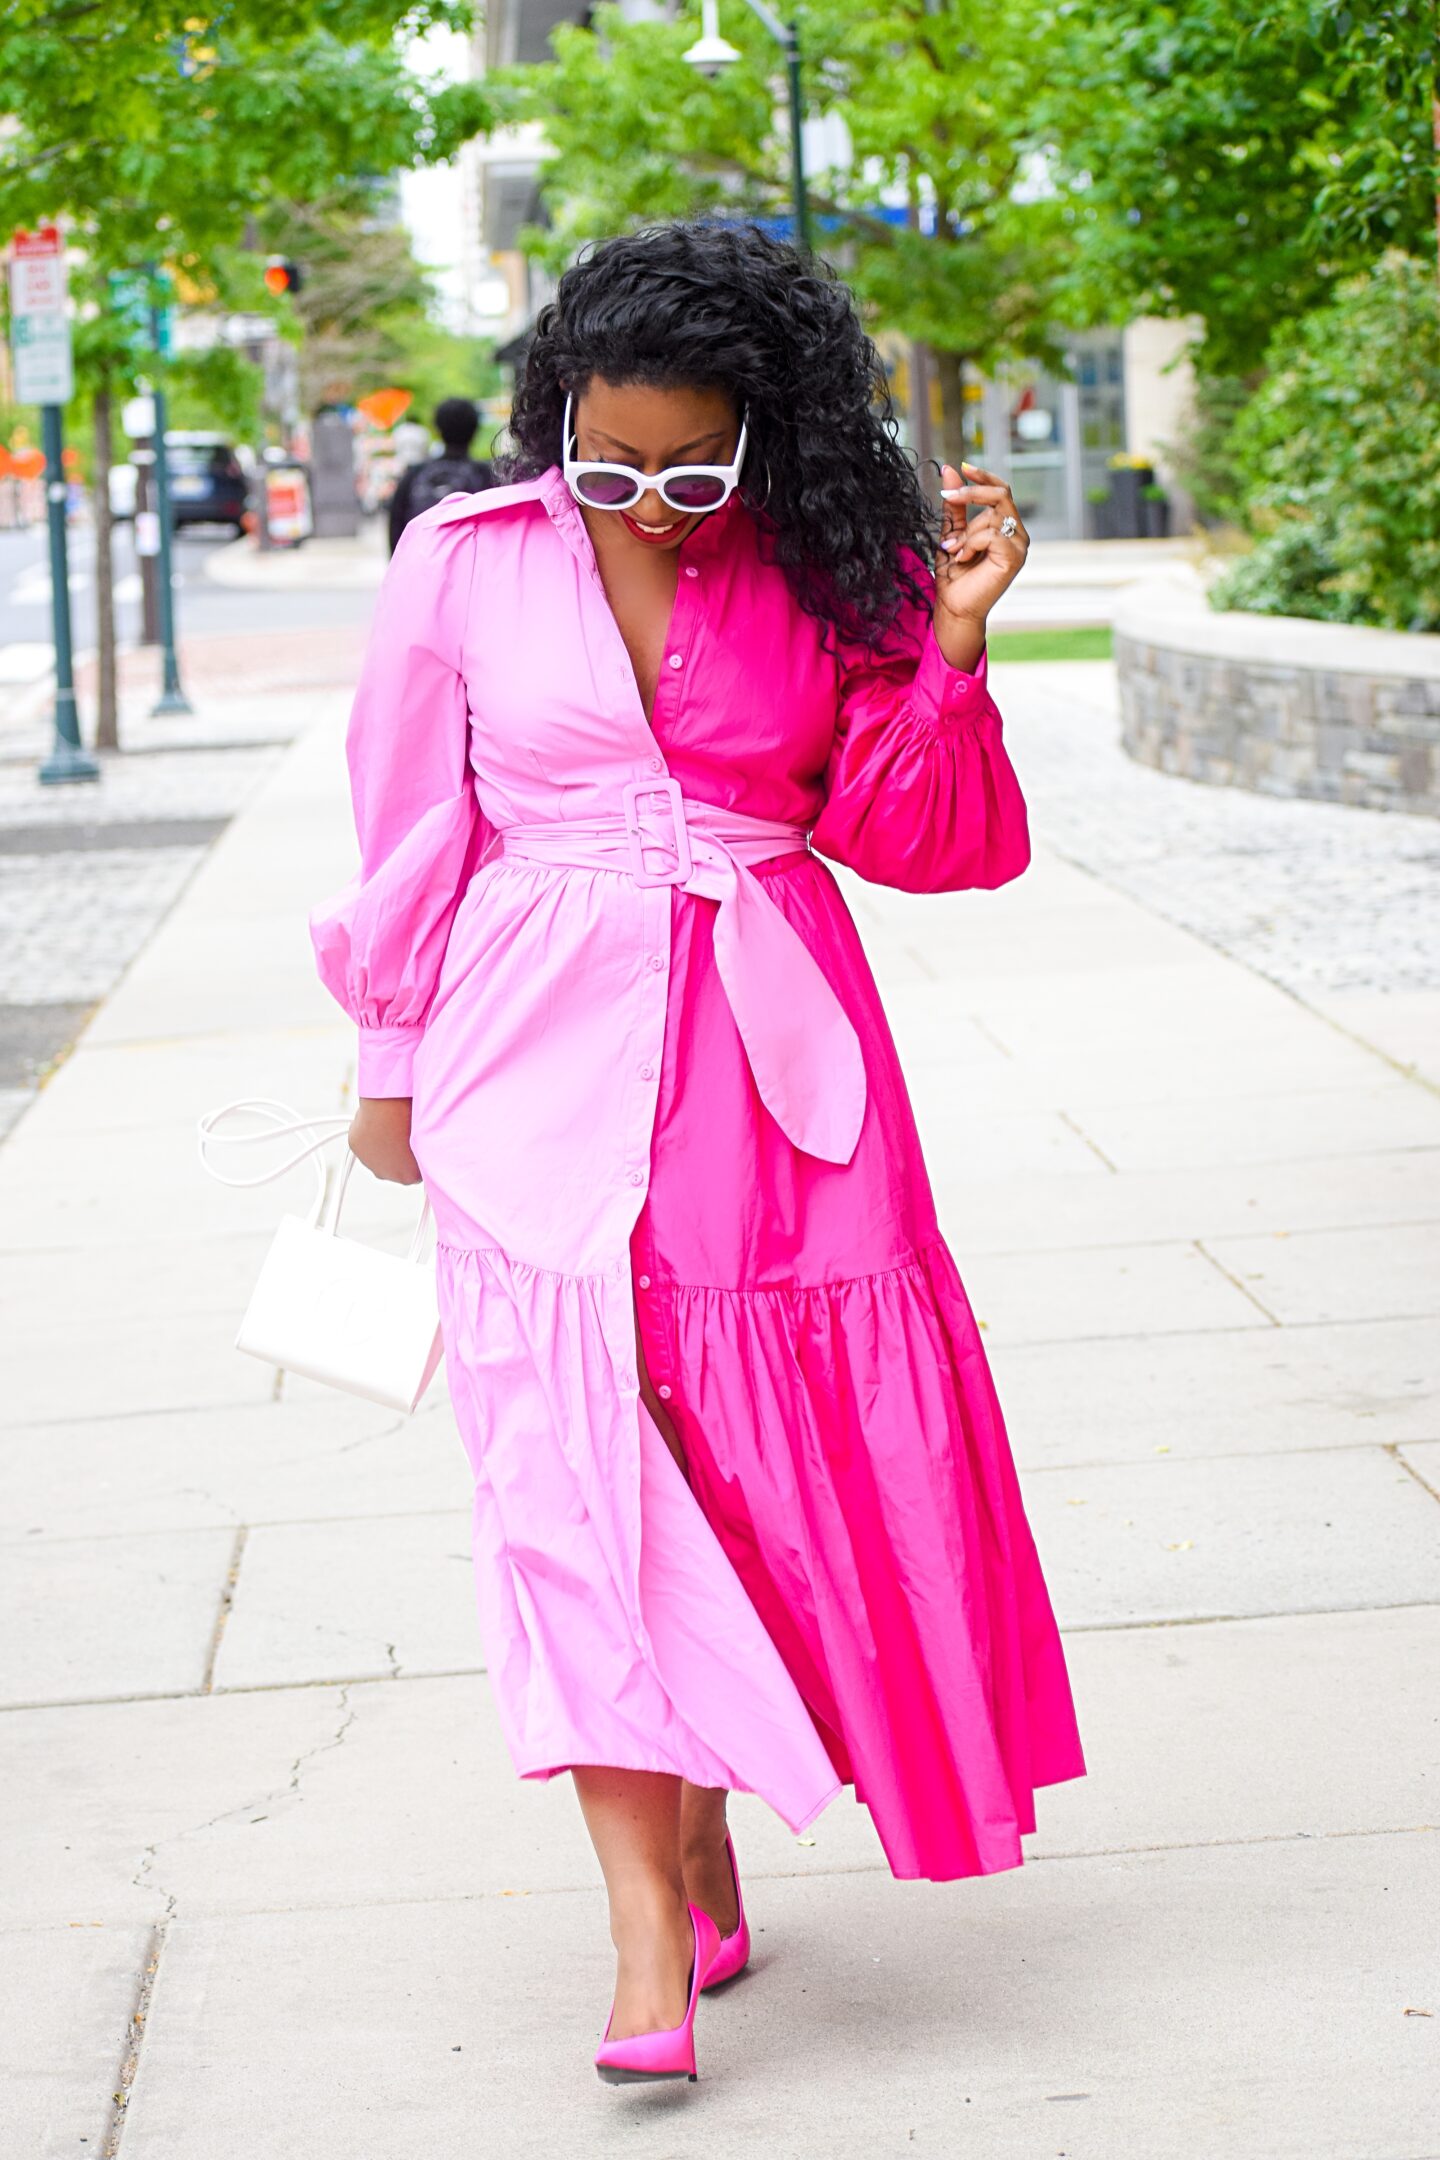 4 Easy Ways to Style a Shirtdress